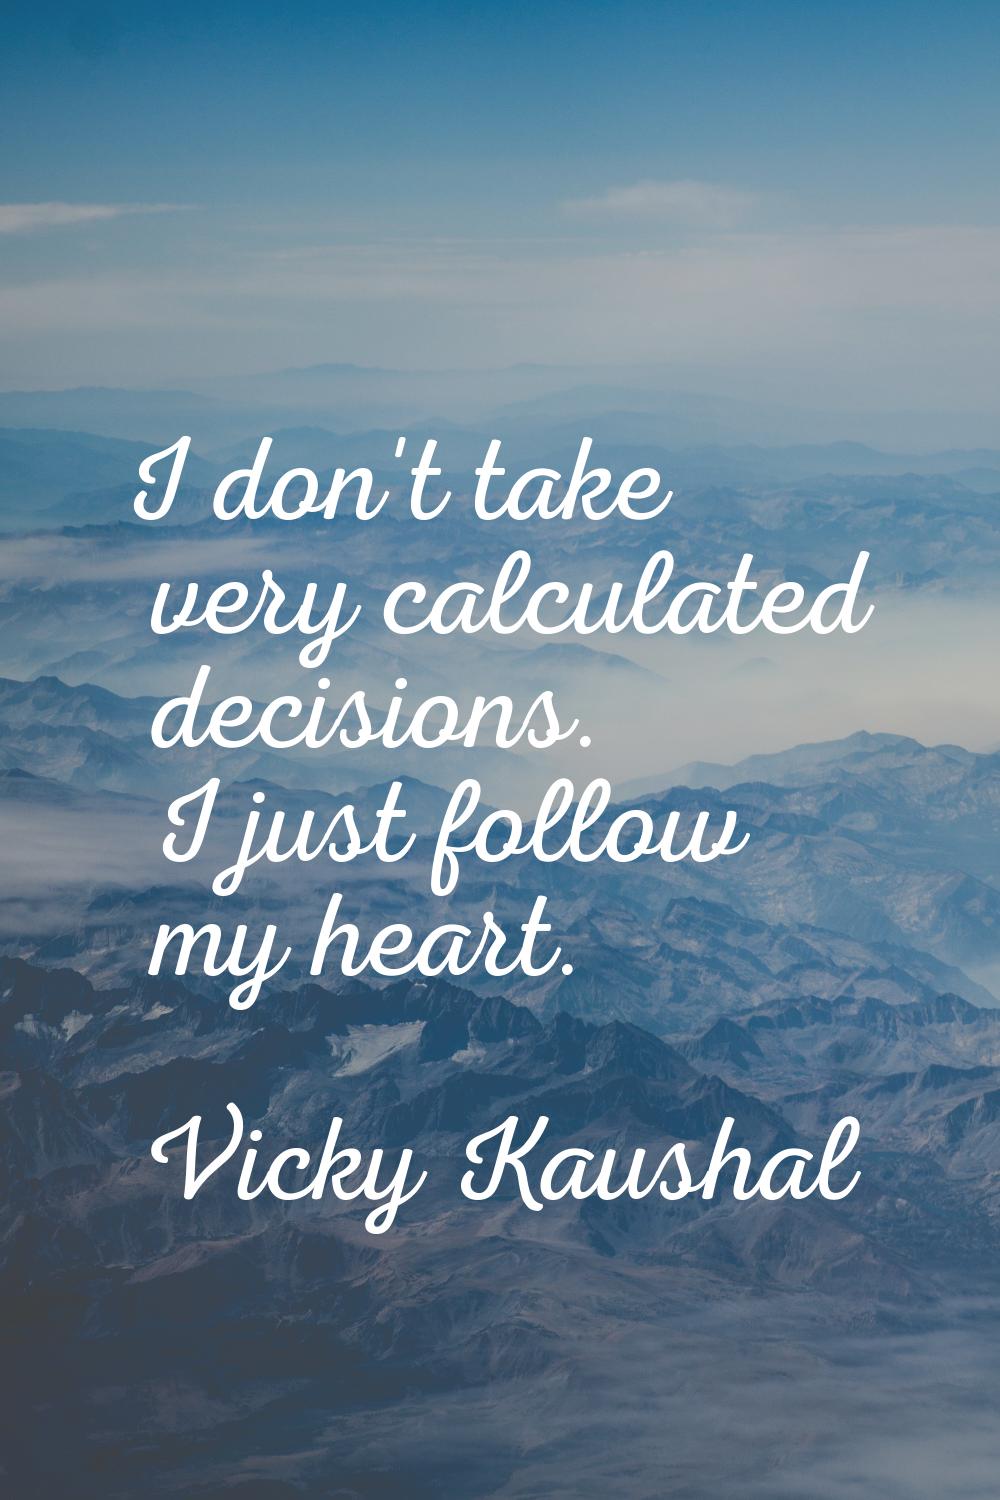 I don't take very calculated decisions. I just follow my heart.